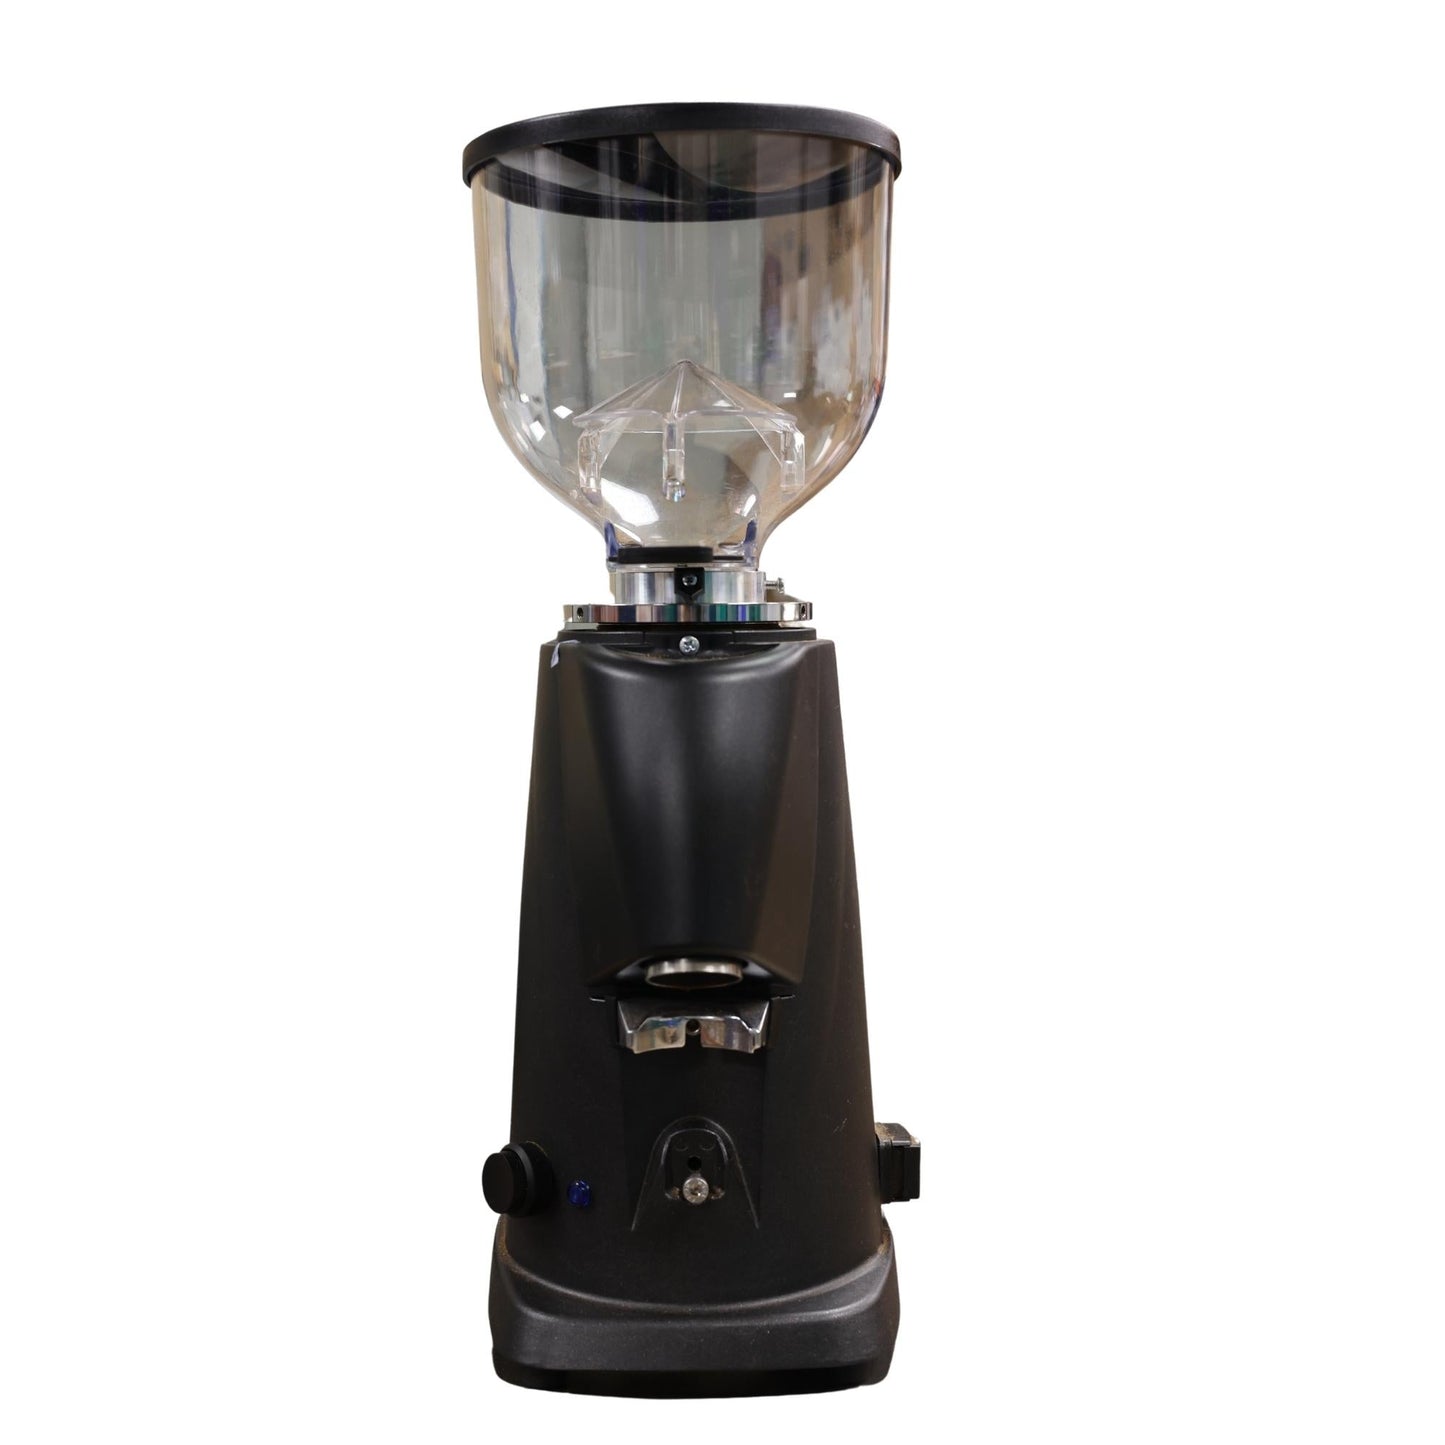 Fiorenzato F4 E Grinder - Black Grinder body with Clear Bean hooper with Black Lid - Velo Coffee Roasters